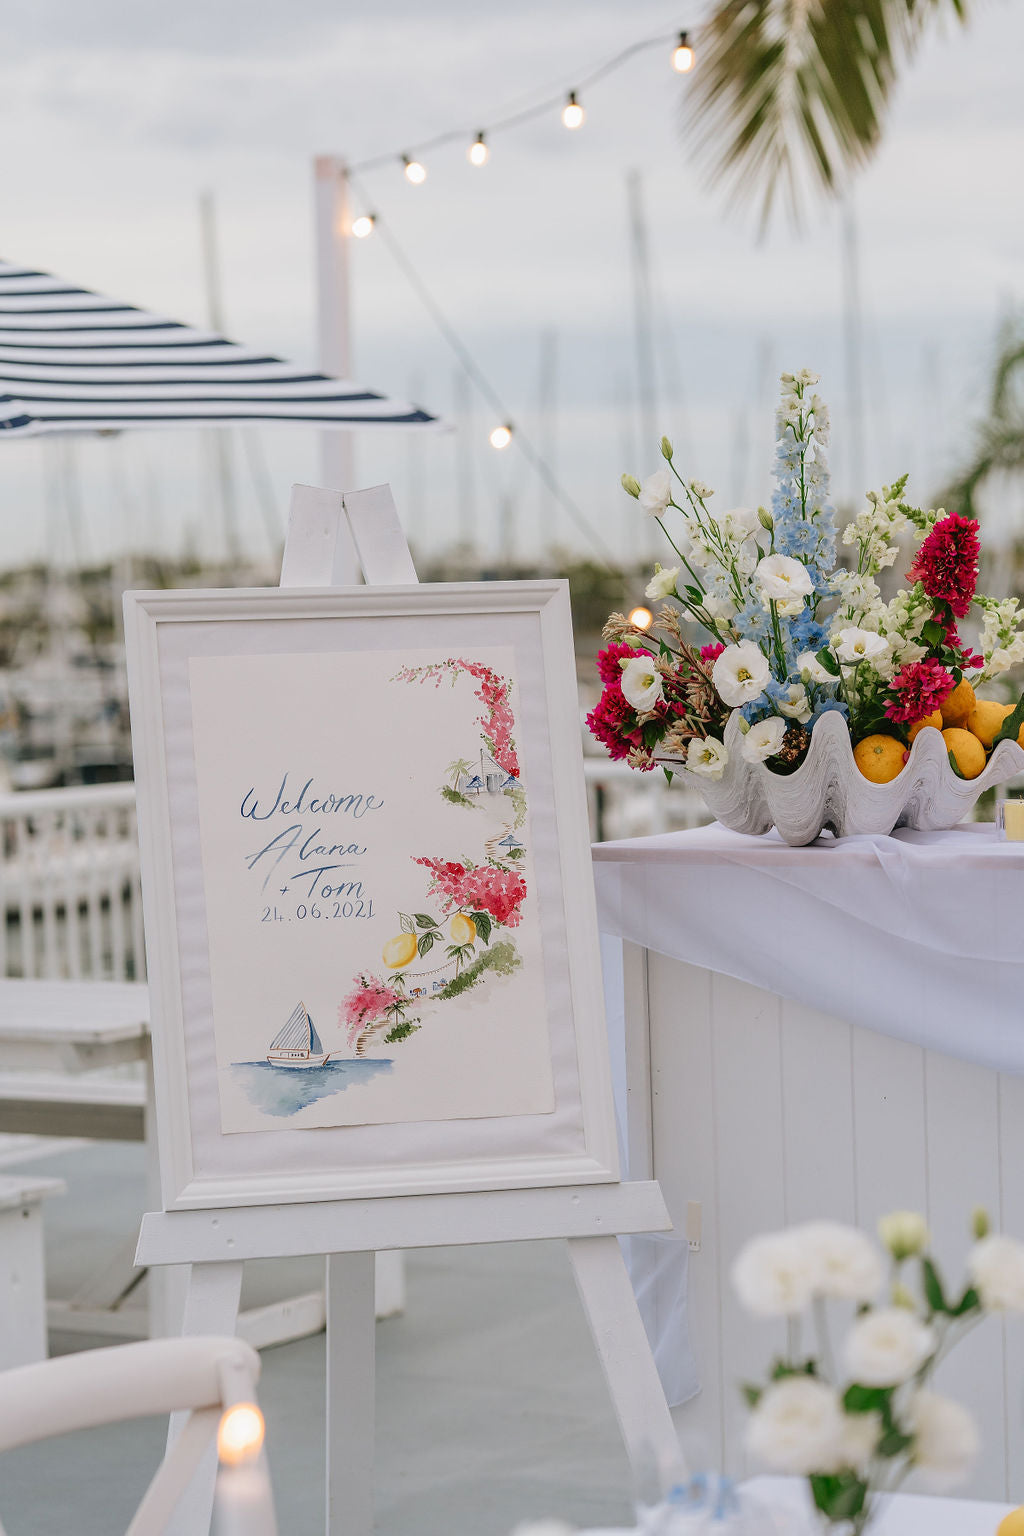 Watercolour beach wedding sign with lemons and sailing boats for a Capri style wedding